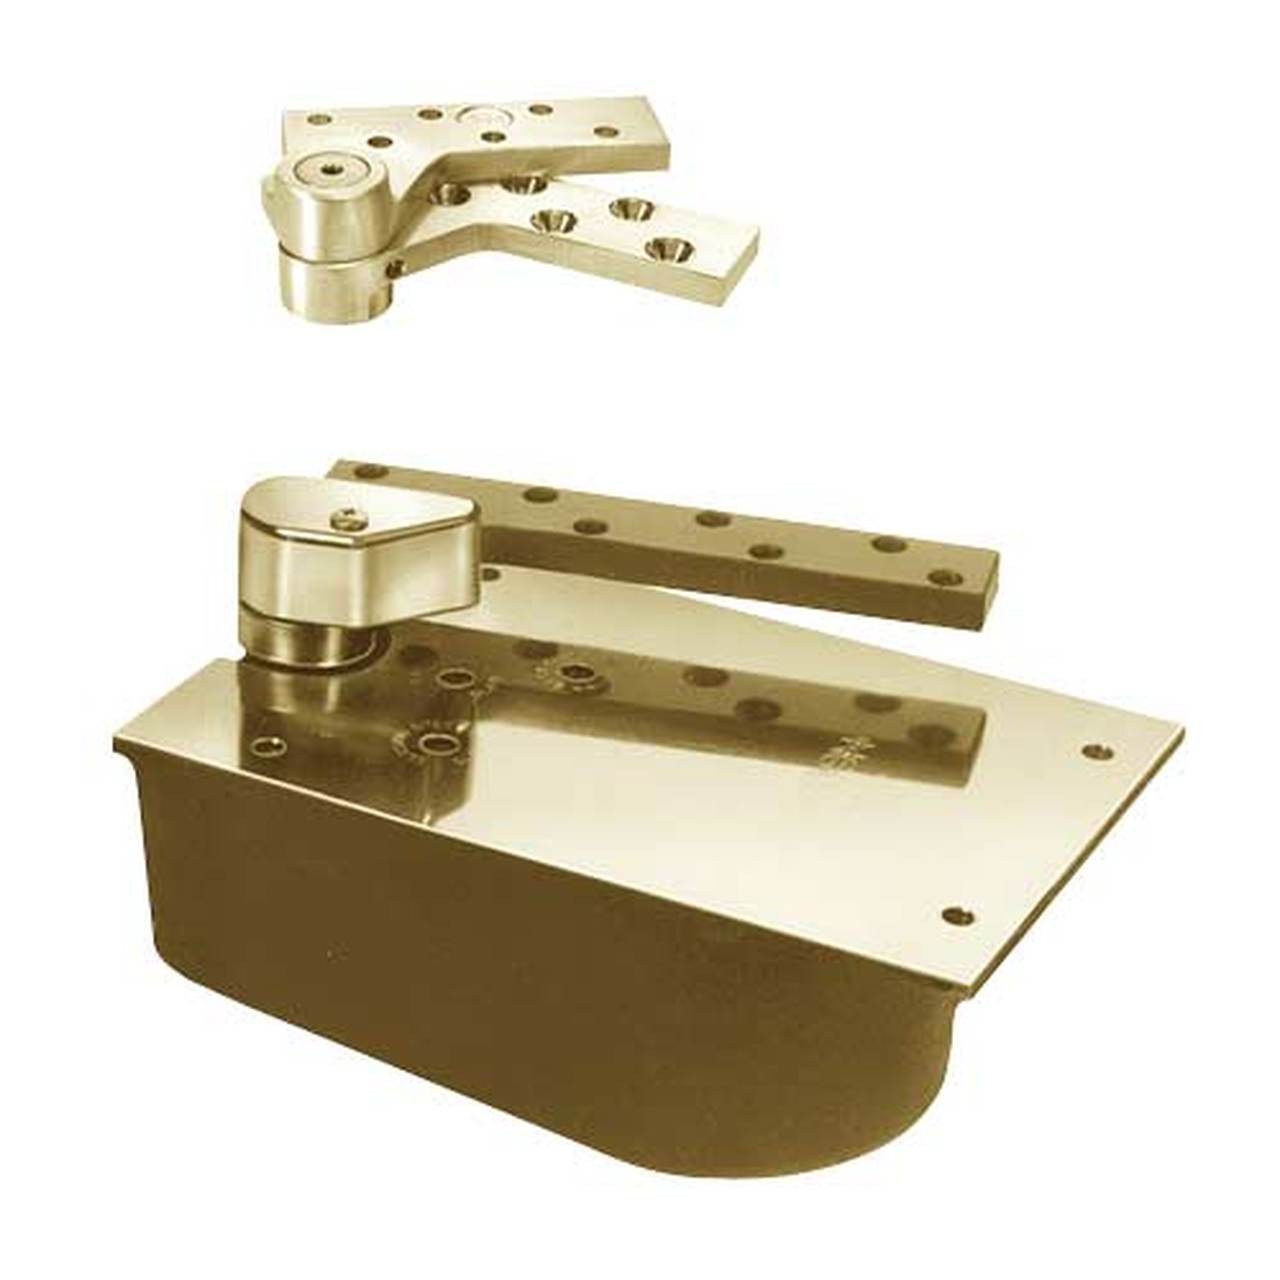 L27-85N-LFP-LCC-RH-2-1/2-606 Rixson 27 Series Extra Heavy Duty Lead Lined Offset Floor Closer in Satin Brass Finish